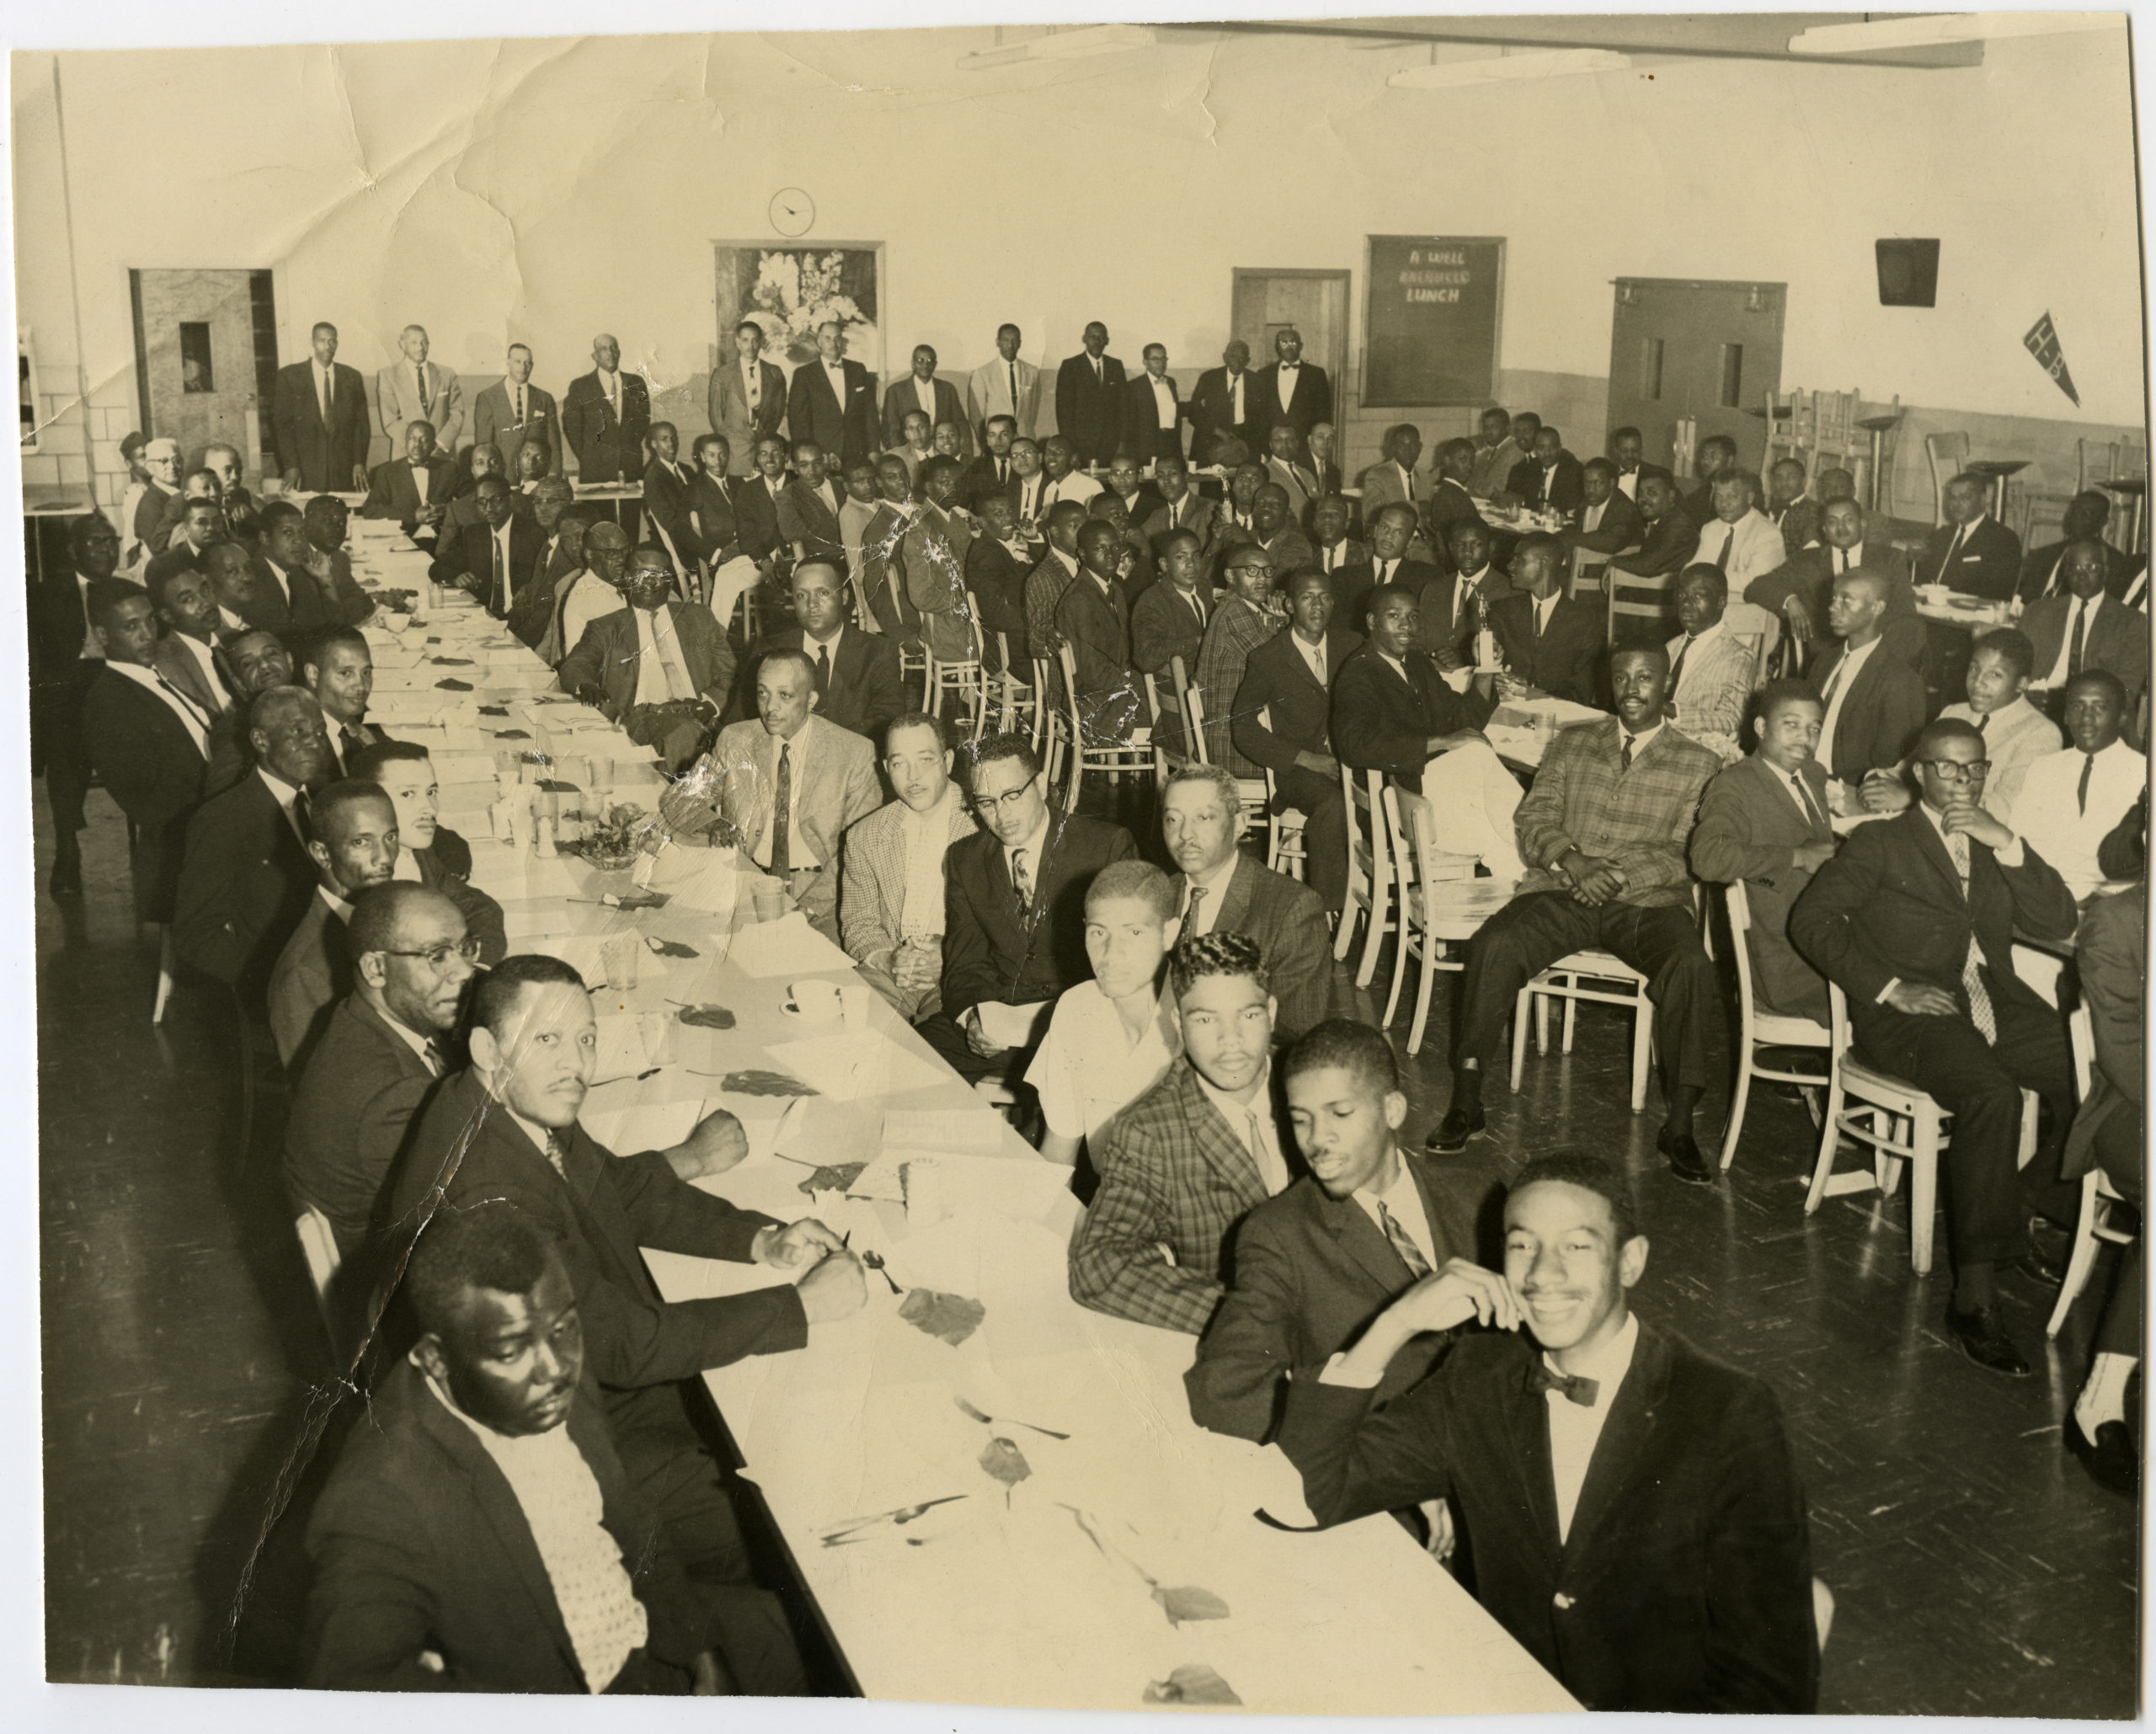 Banquet in Hoffman Boston school cafeteria, 1950s. Source: Center for Local History, Arlington Public Library.